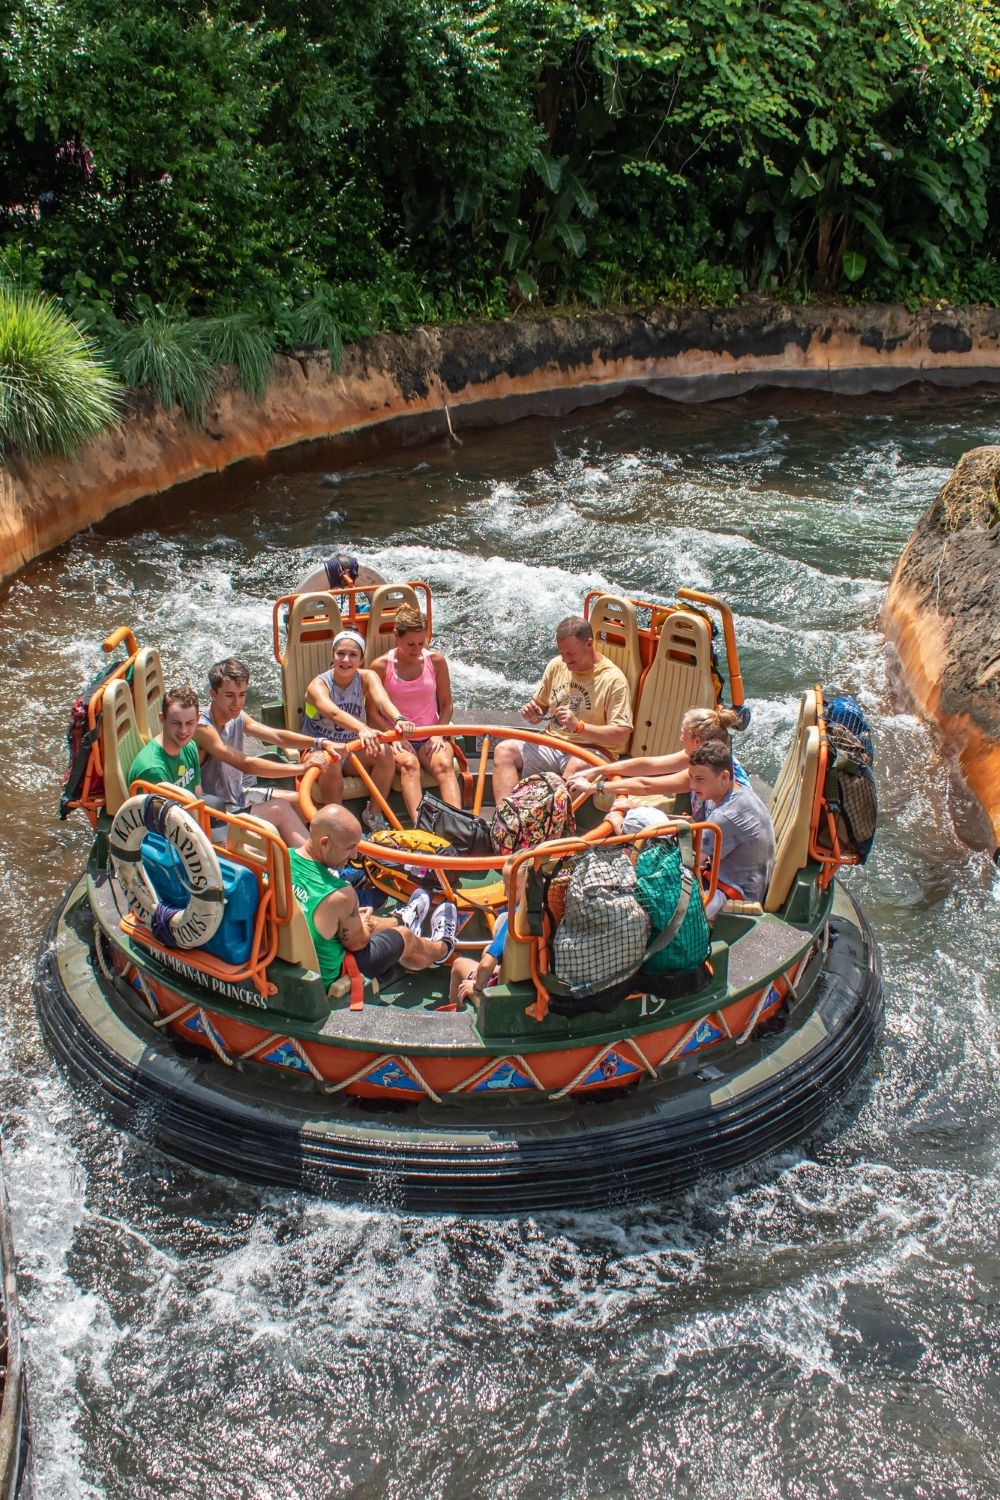 guests riding kali river rapids to help them stay cool at disney world